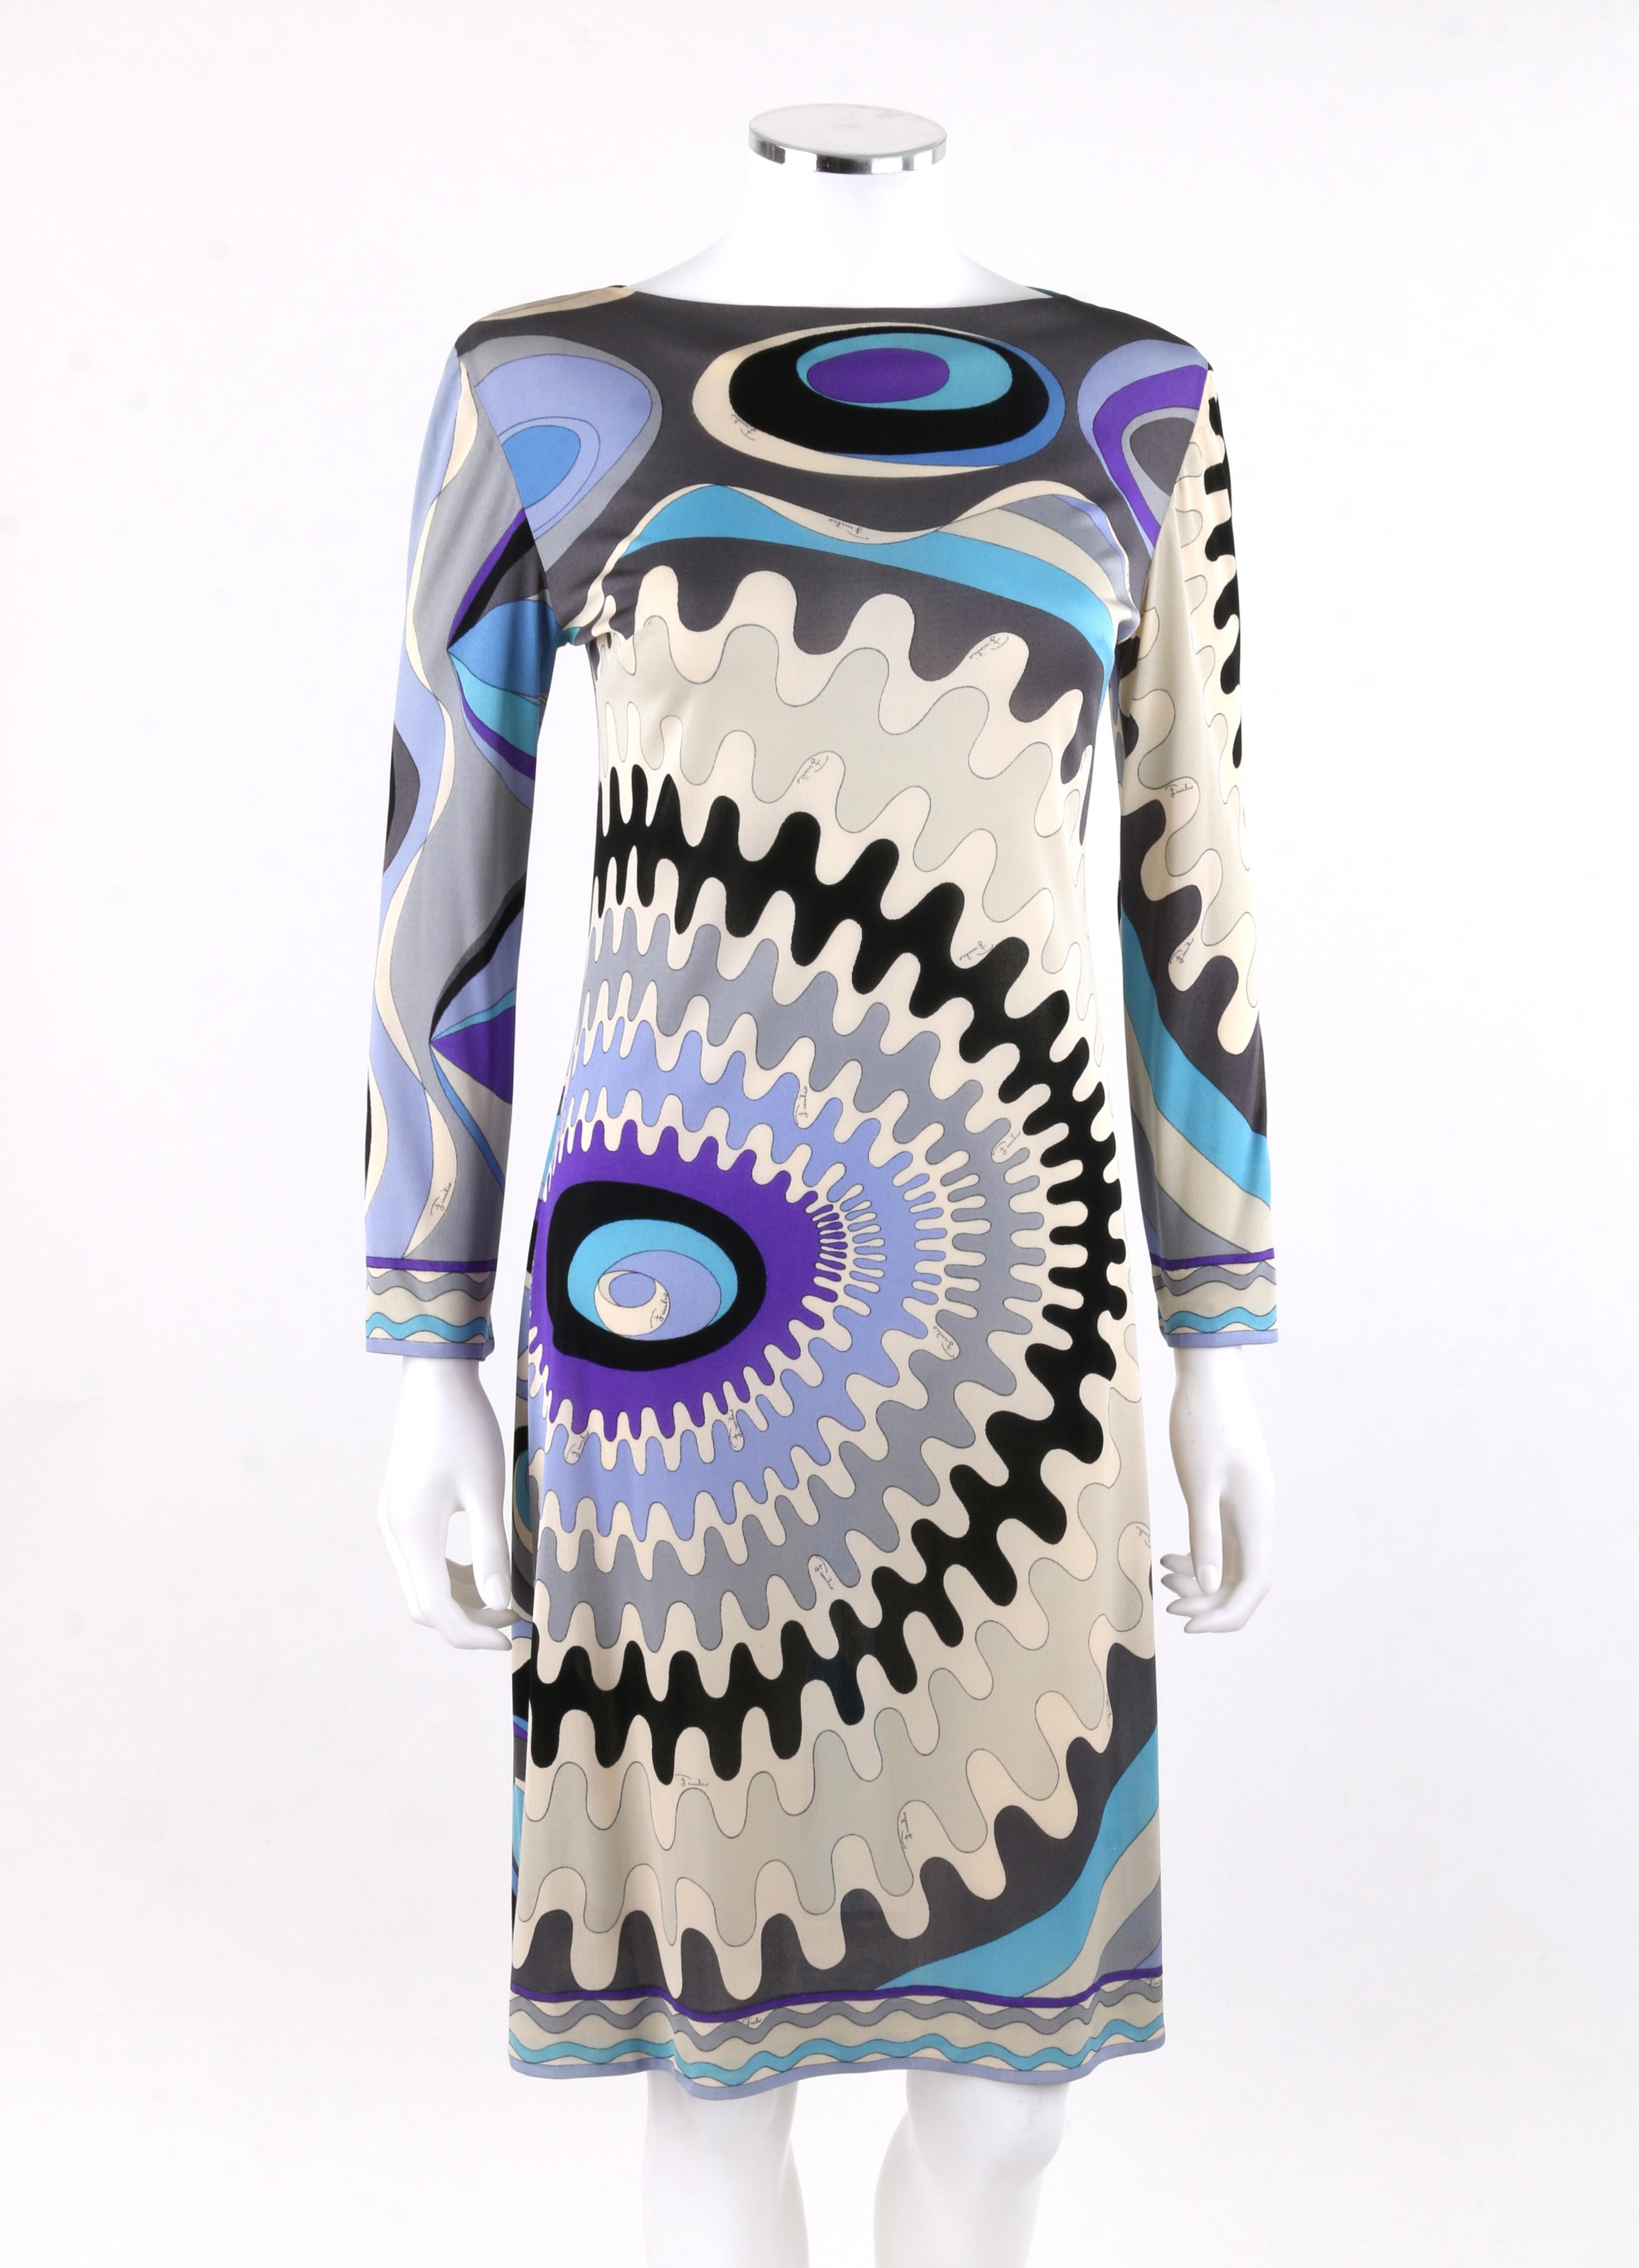 EMILIO PUCCI c.1960’s Blue Mod Op Art Signature Print Silk Jersey Knit Wedge Dress
 
Circa: 1960’s
Label(s): Emilio Pucci / Exclusively for Lord & Taylor 
Style: Wedge Dress
Color(s): Shades of blue, grey, purple, black and off-white. 
Lined: